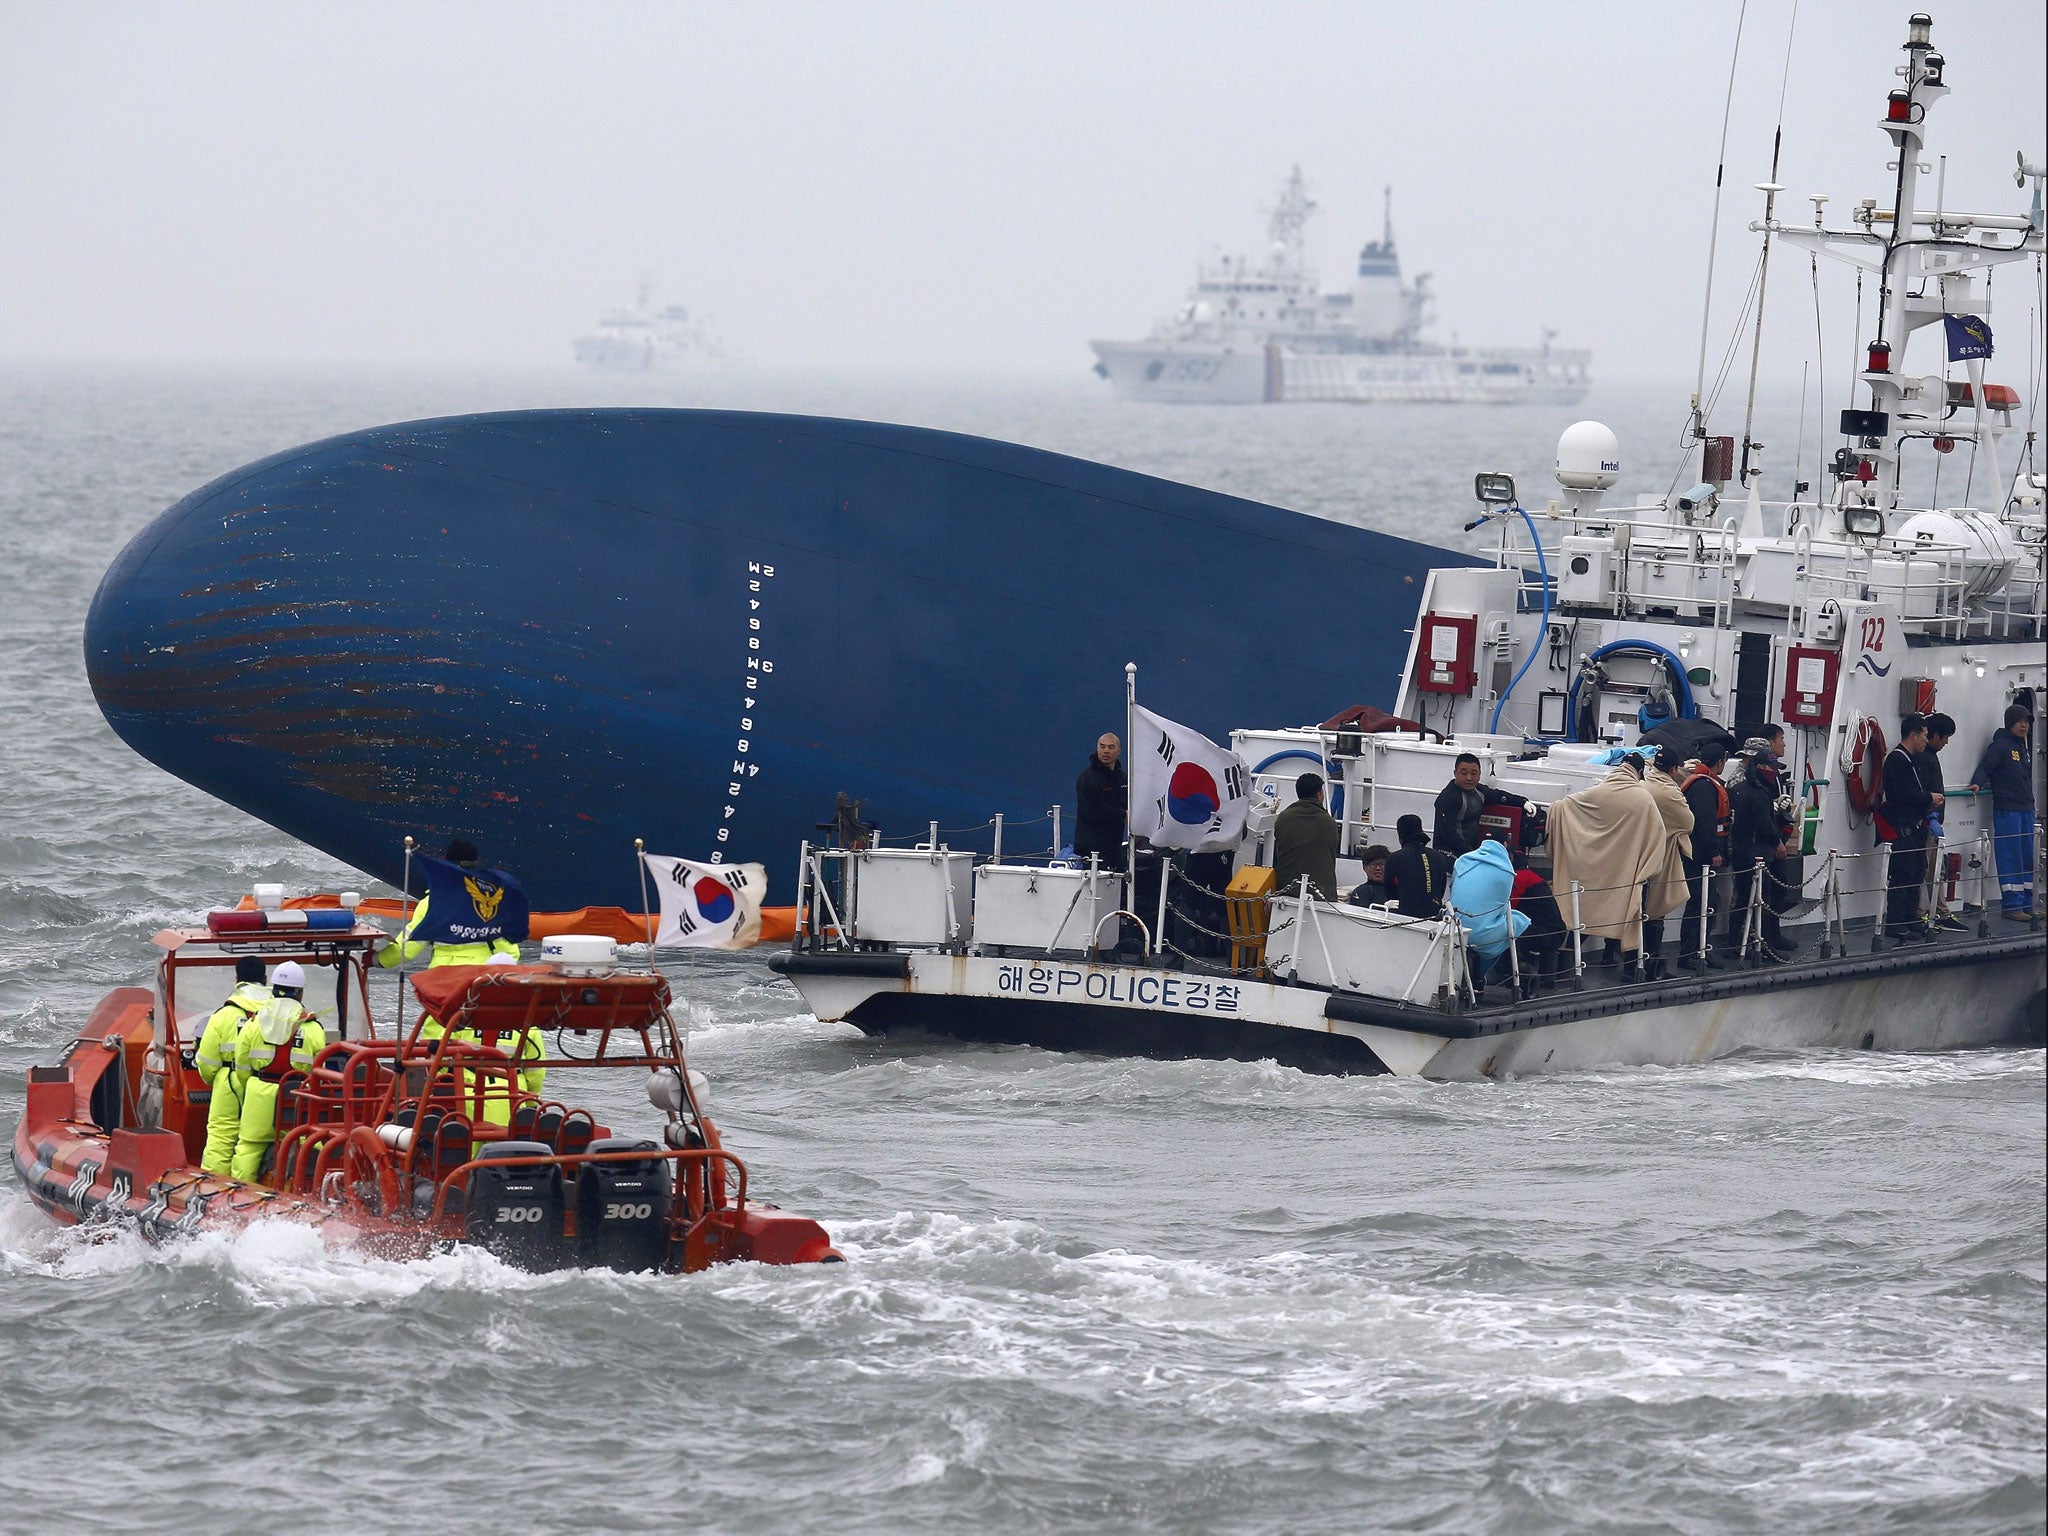 A view of the rescue operation underway after the ferry Sewol sank in waters off Jindo Island in the southwestern province of South Jeolla